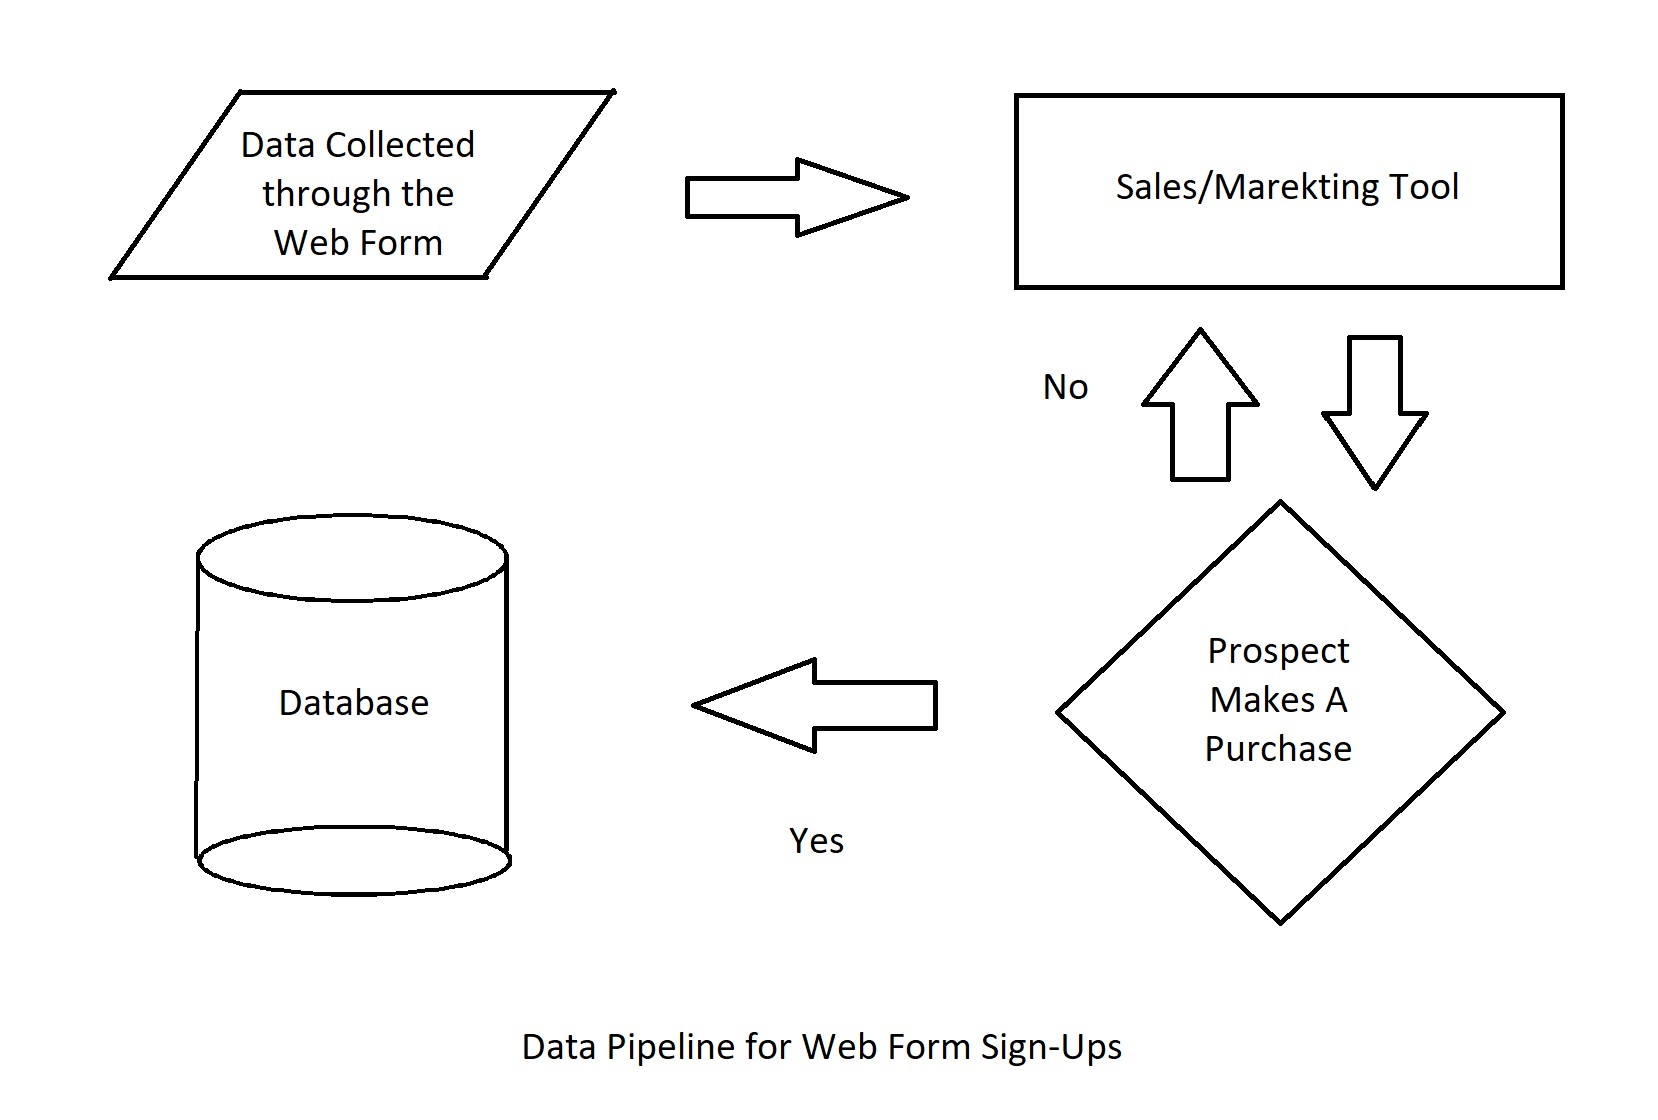 Data pipeline for web form sign-ups